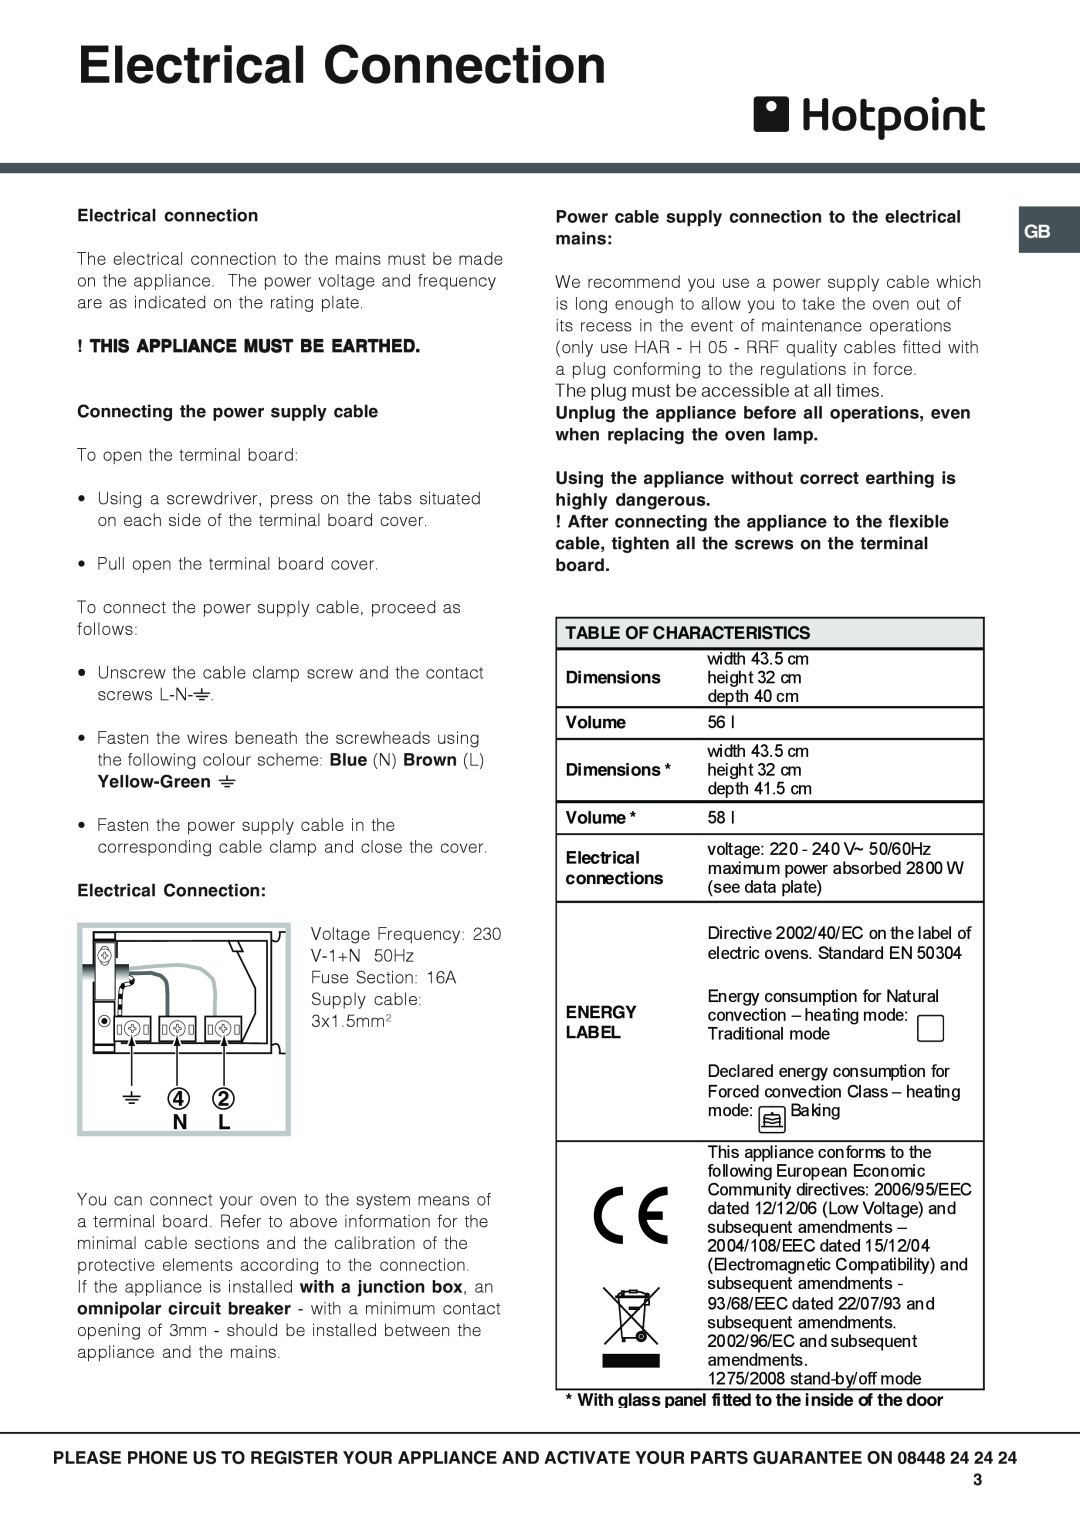 Hotpoint SH89CXKS089CX Electrical Connection, 4 2 N L, Electrical connection, Yellow-Green , Table Of Characteristics 